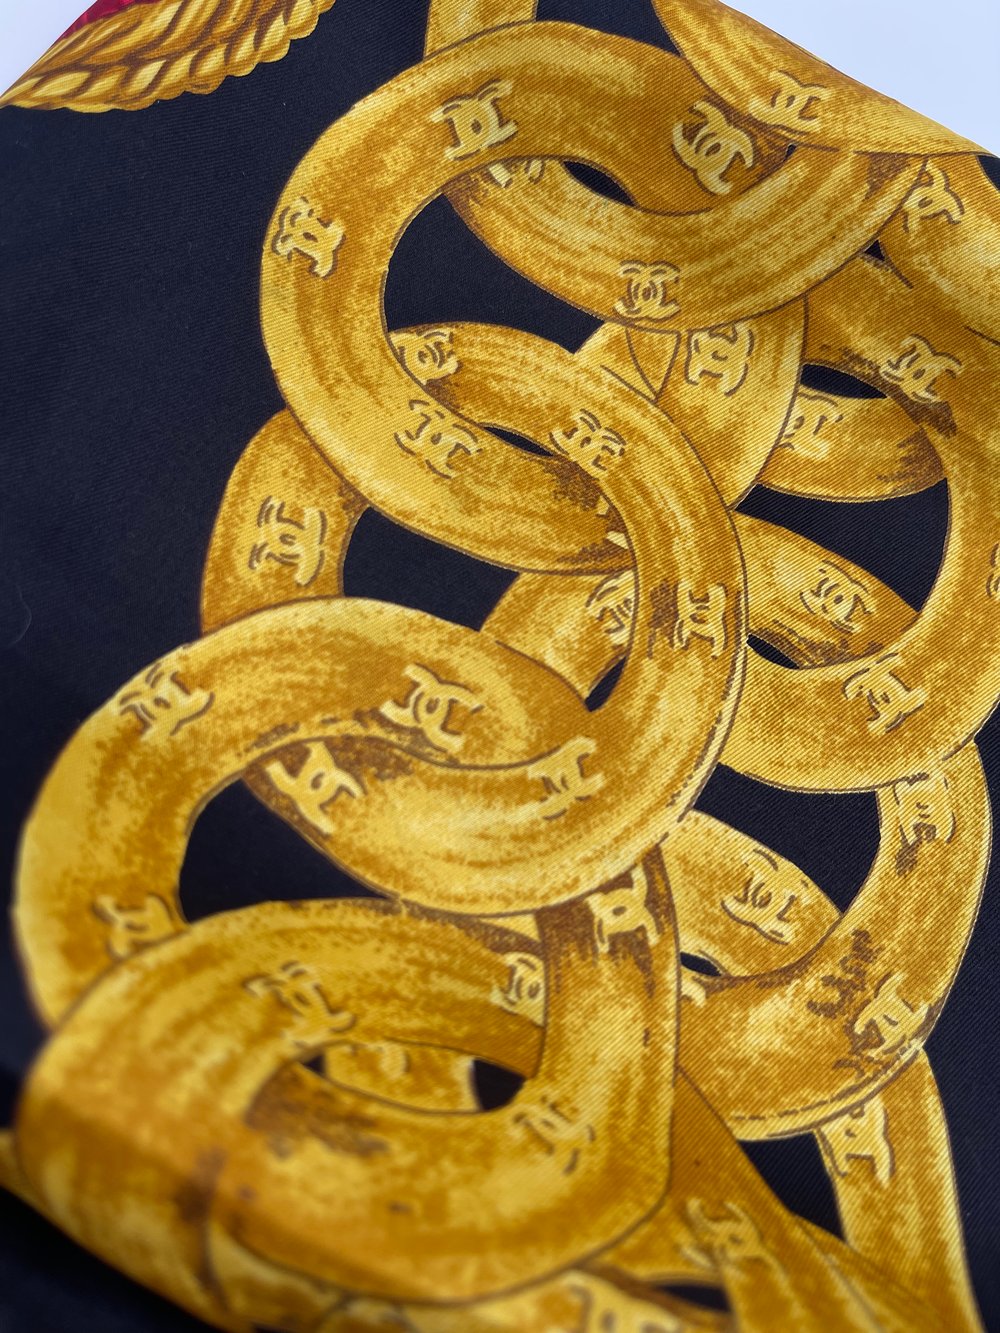 Chanel Vintage Jewelry scarf 